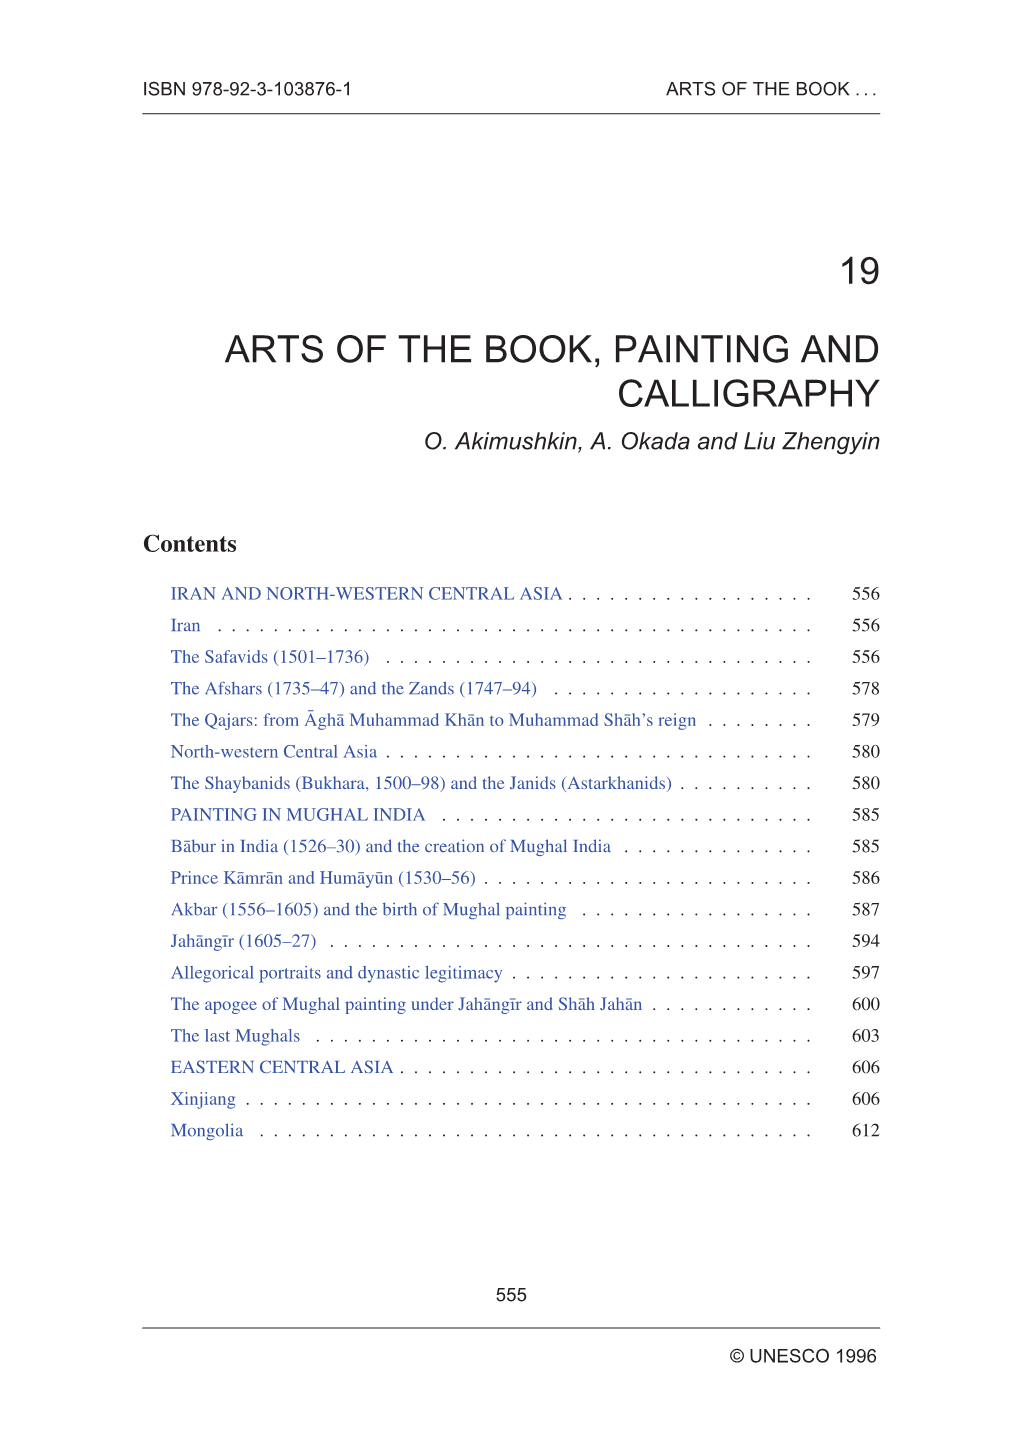 19 Arts of the Book, Painting and Calligraphy